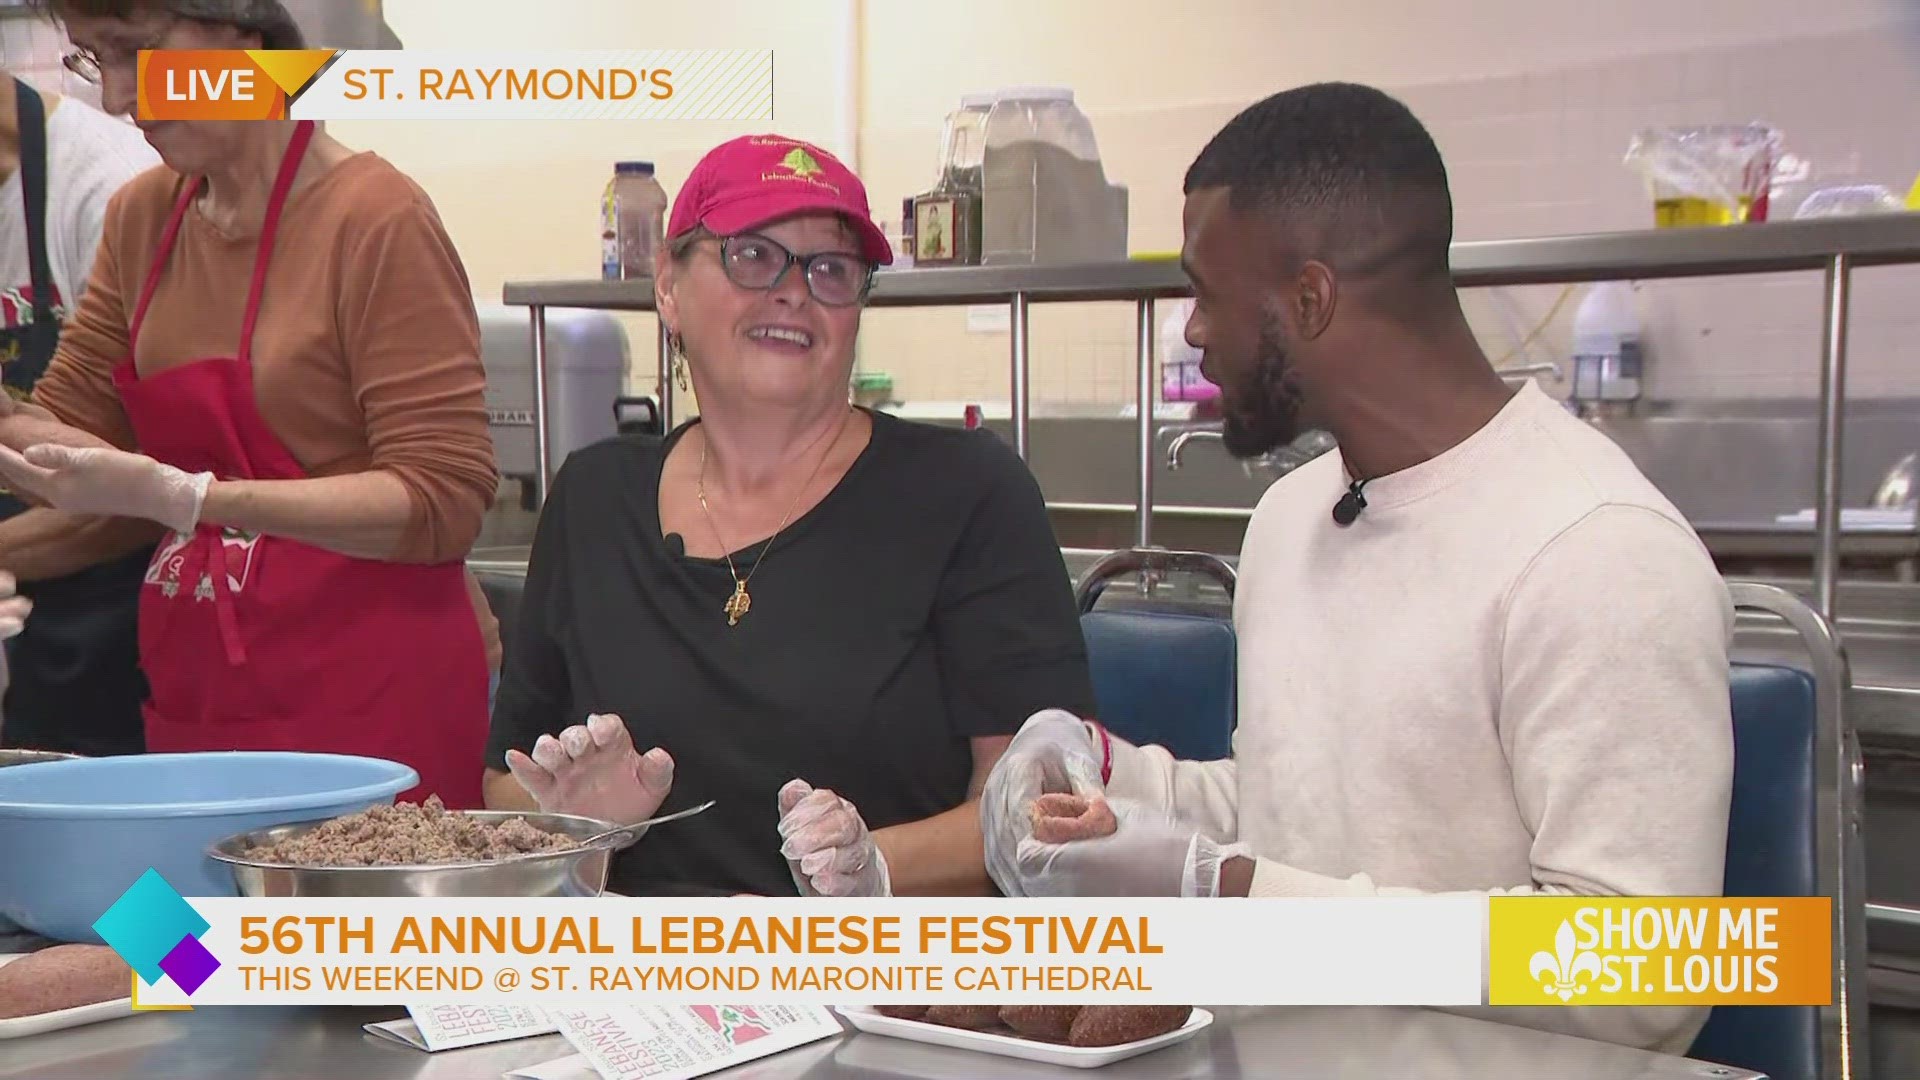 Malik Wilson stopped by the St. Raymond's kitchen to learn how to make authentic Lebanese dishes and find out more about the annual festival.